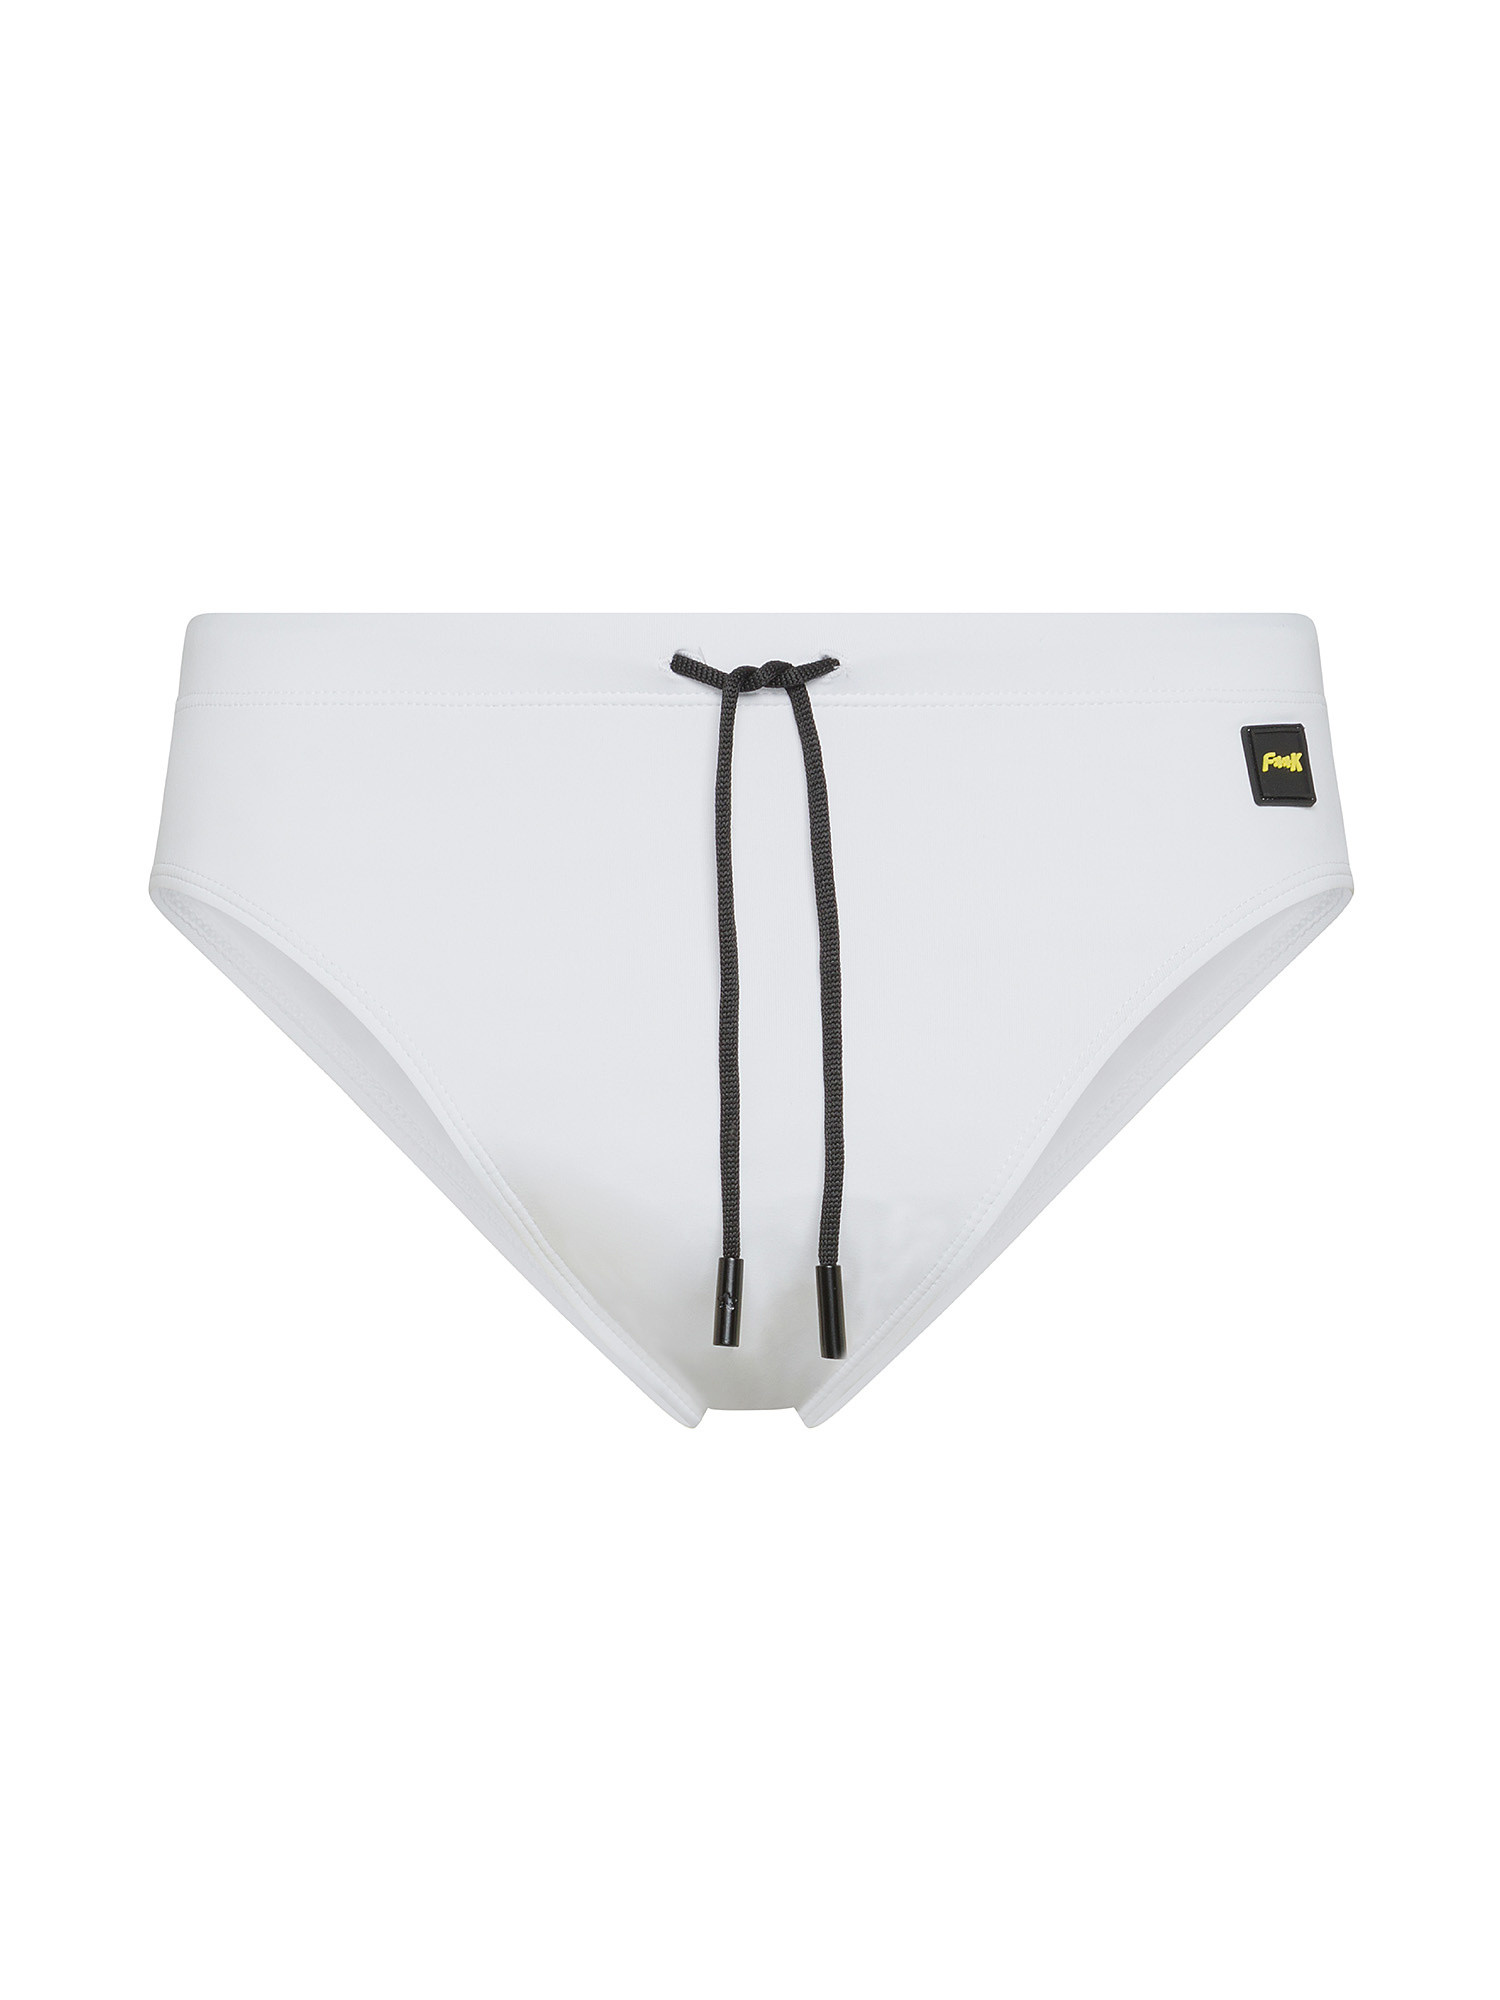 F**K - Briefs with drawstring, White, large image number 0